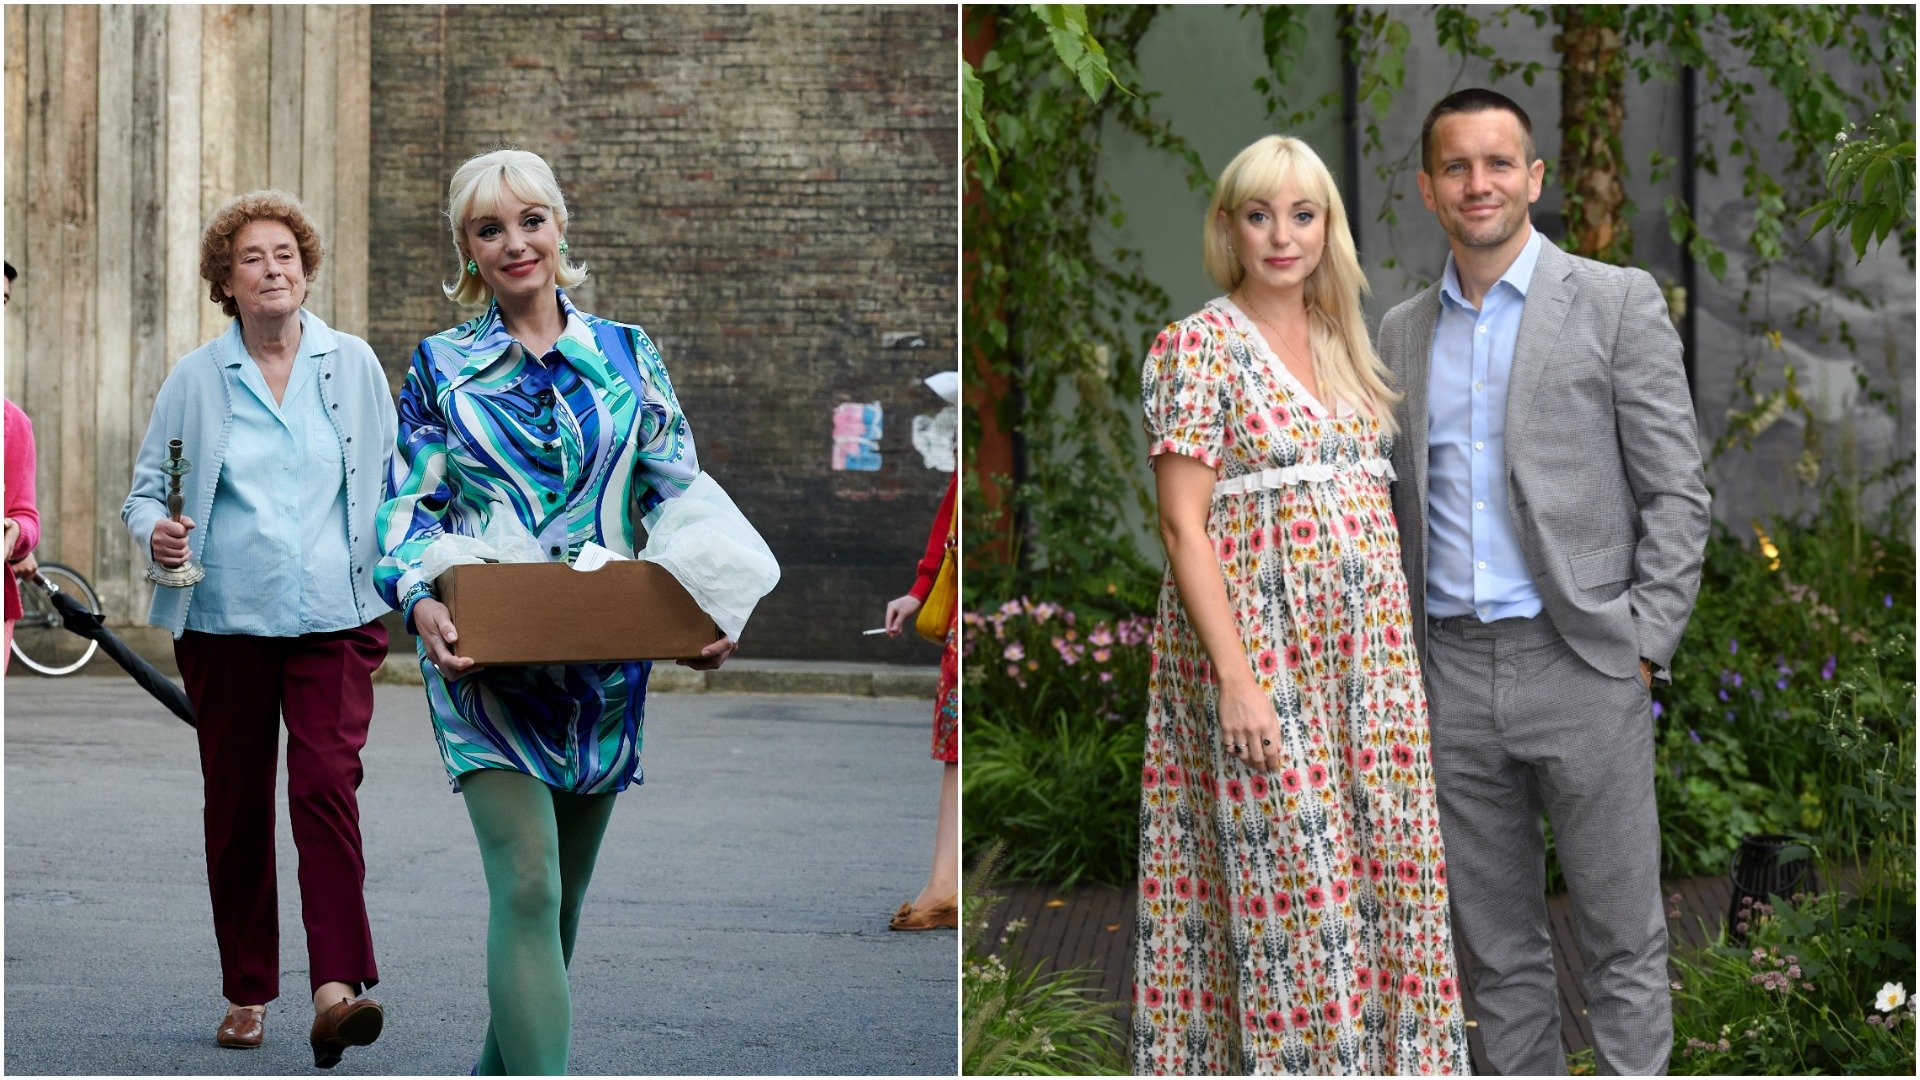 Side-by-side photos of Helen George as Trixie, holding a box, in 'Call the Midwife' and a pregnant Helen George and her partner Jack Ashton